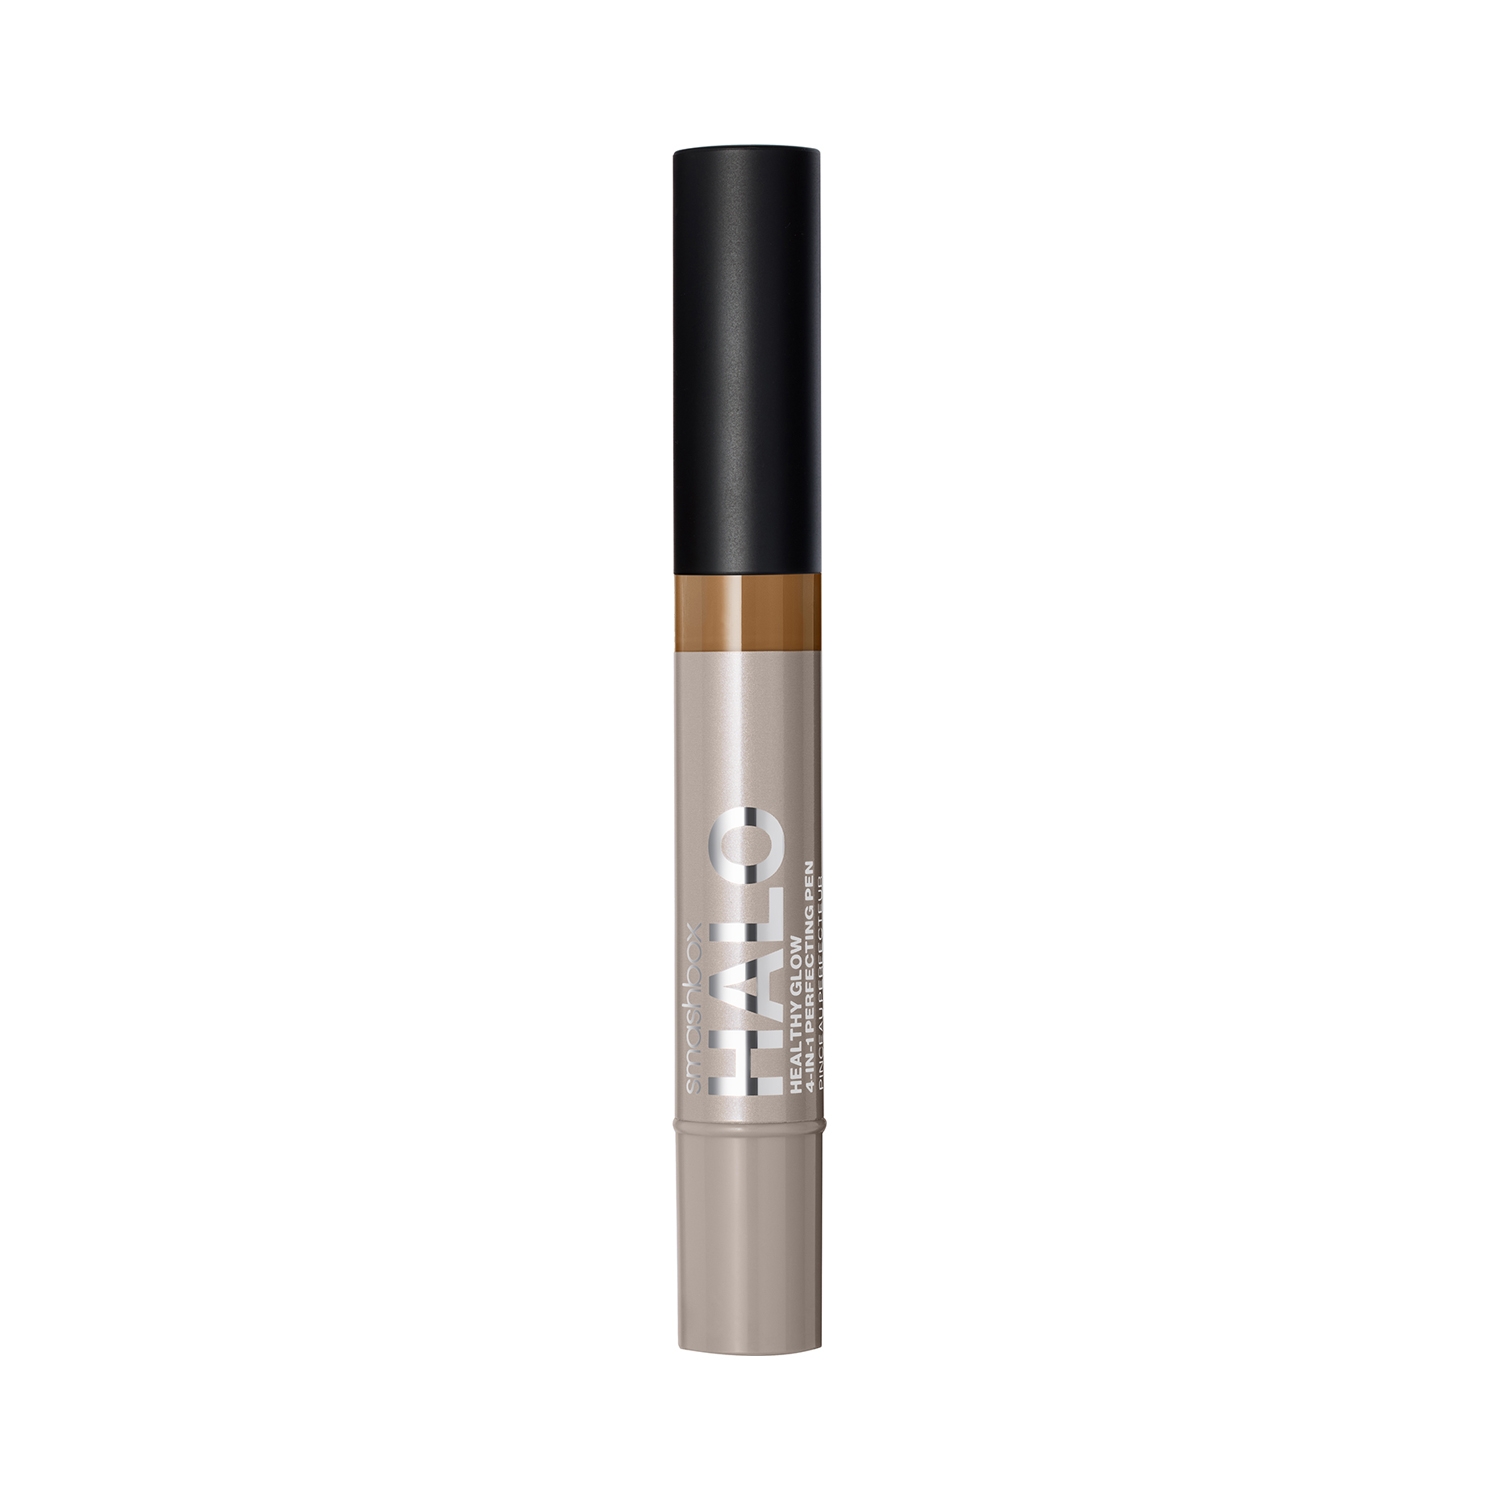 Smashbox | Smashbox Halo Healthy Glow 4-In-1 Perfecting Concealer Pen - T20W (3.5ml)